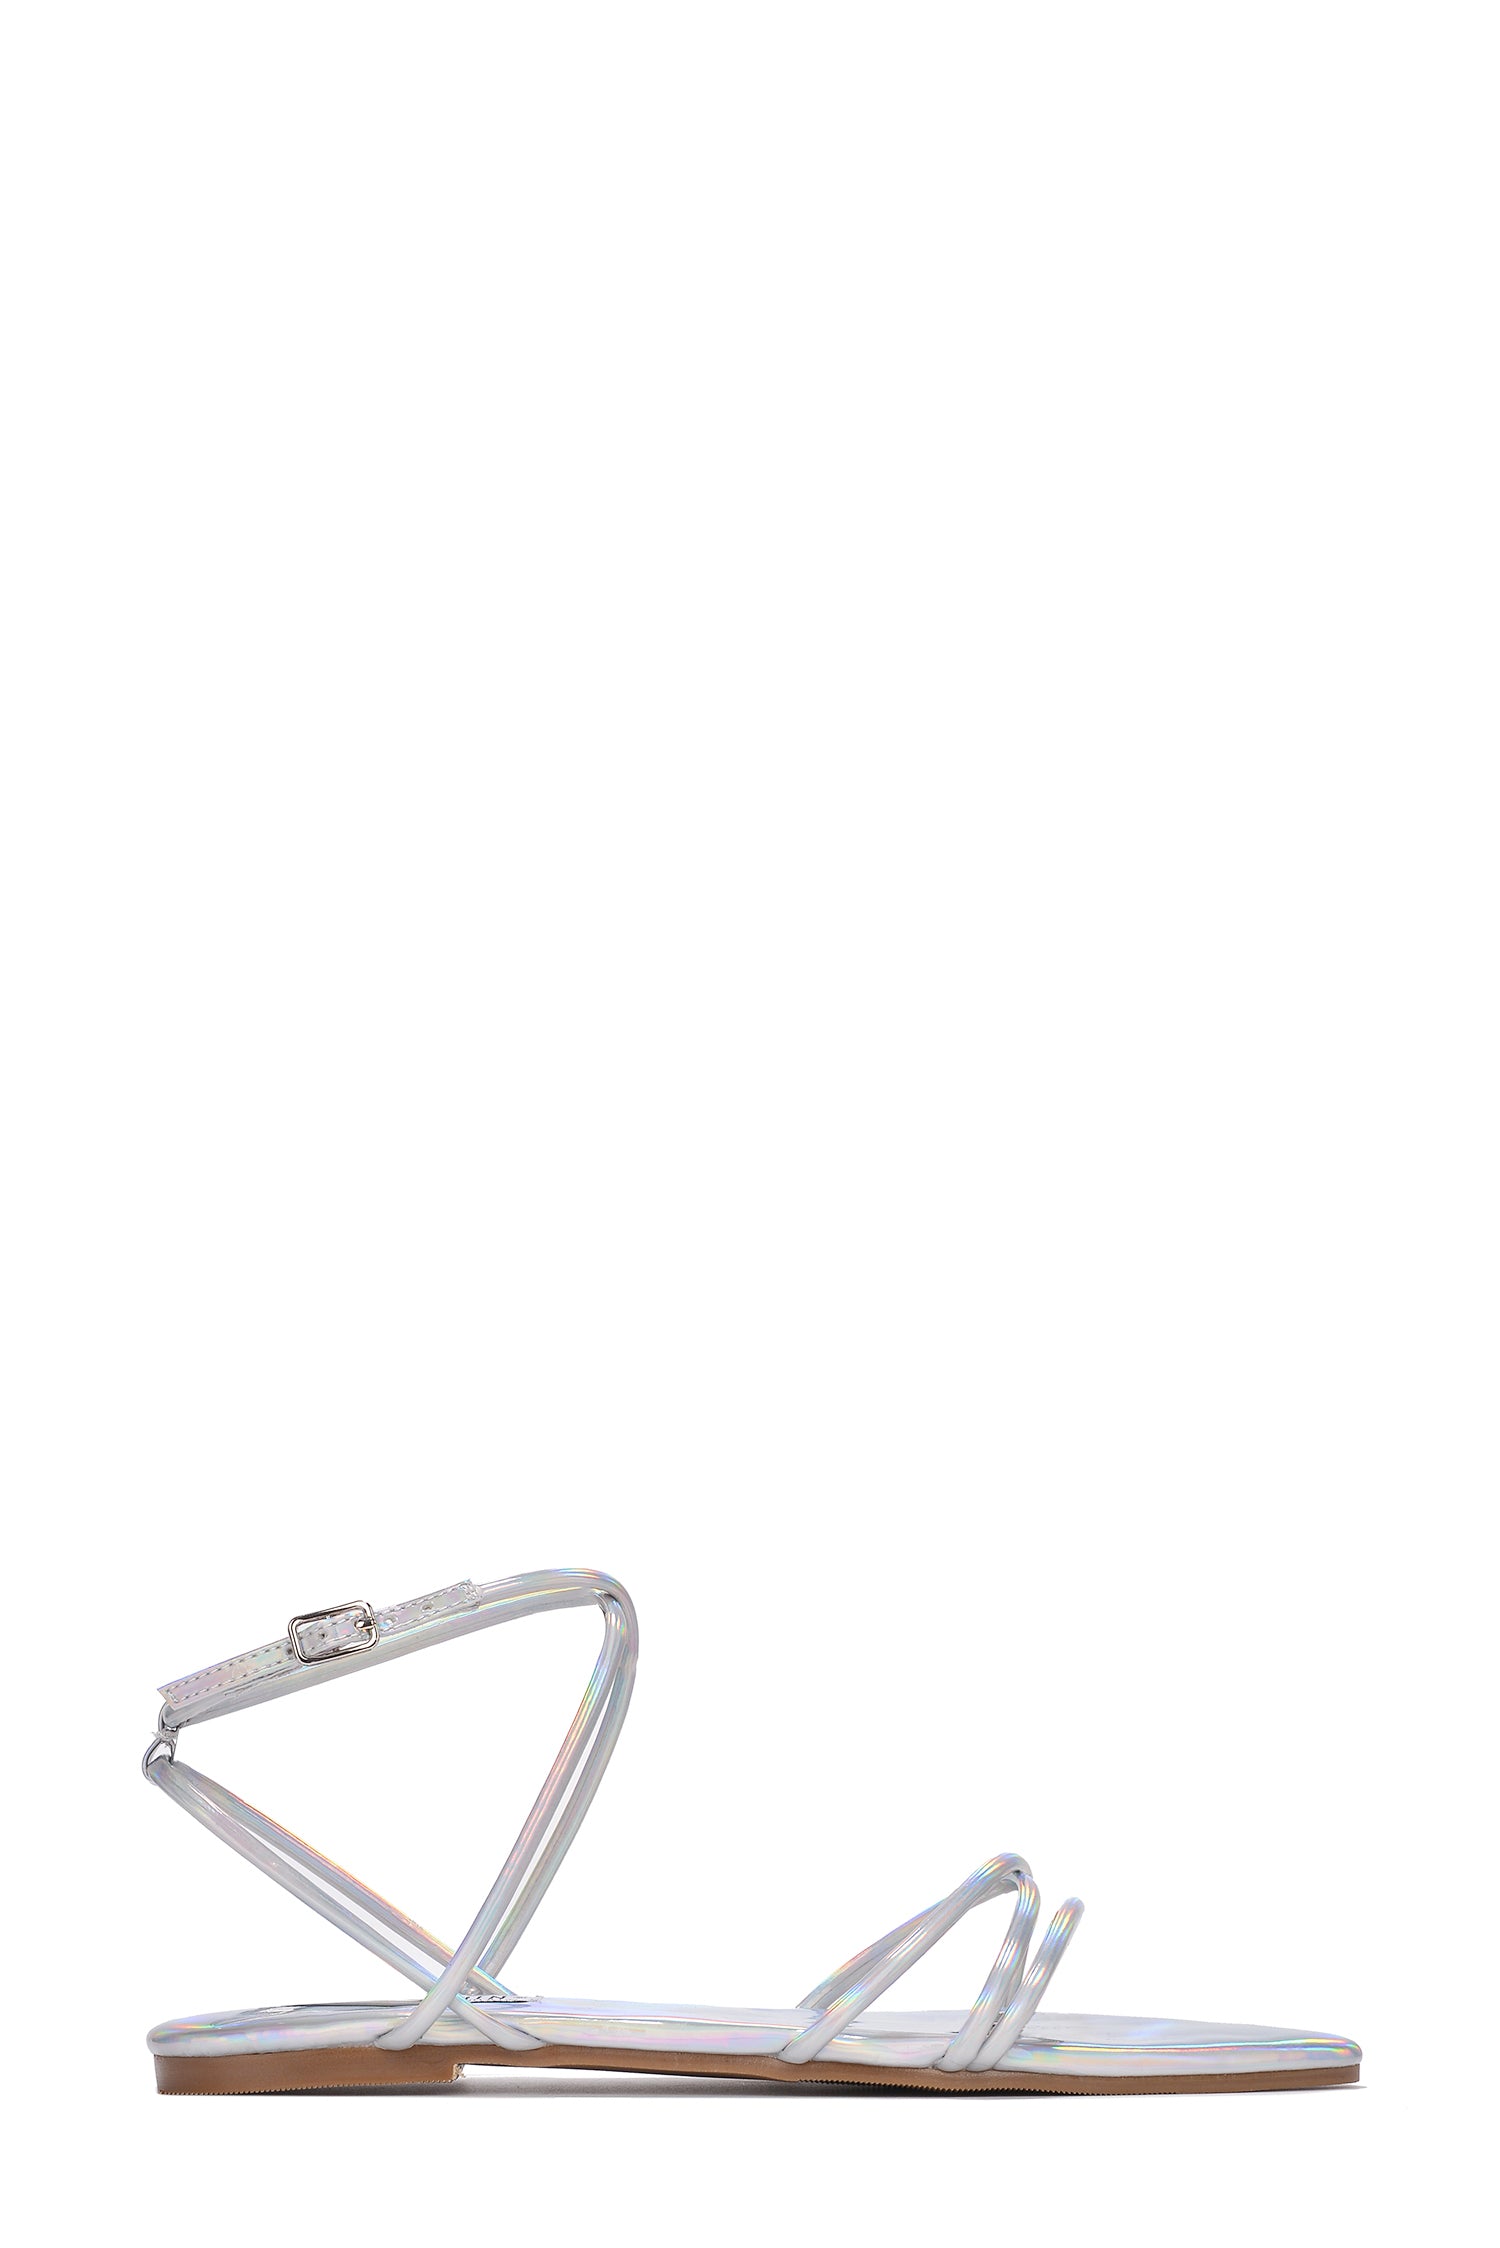 UrbanOG - Bibi Open Toe Strappy Flat Sandals with Ankle Strap - SANDALS